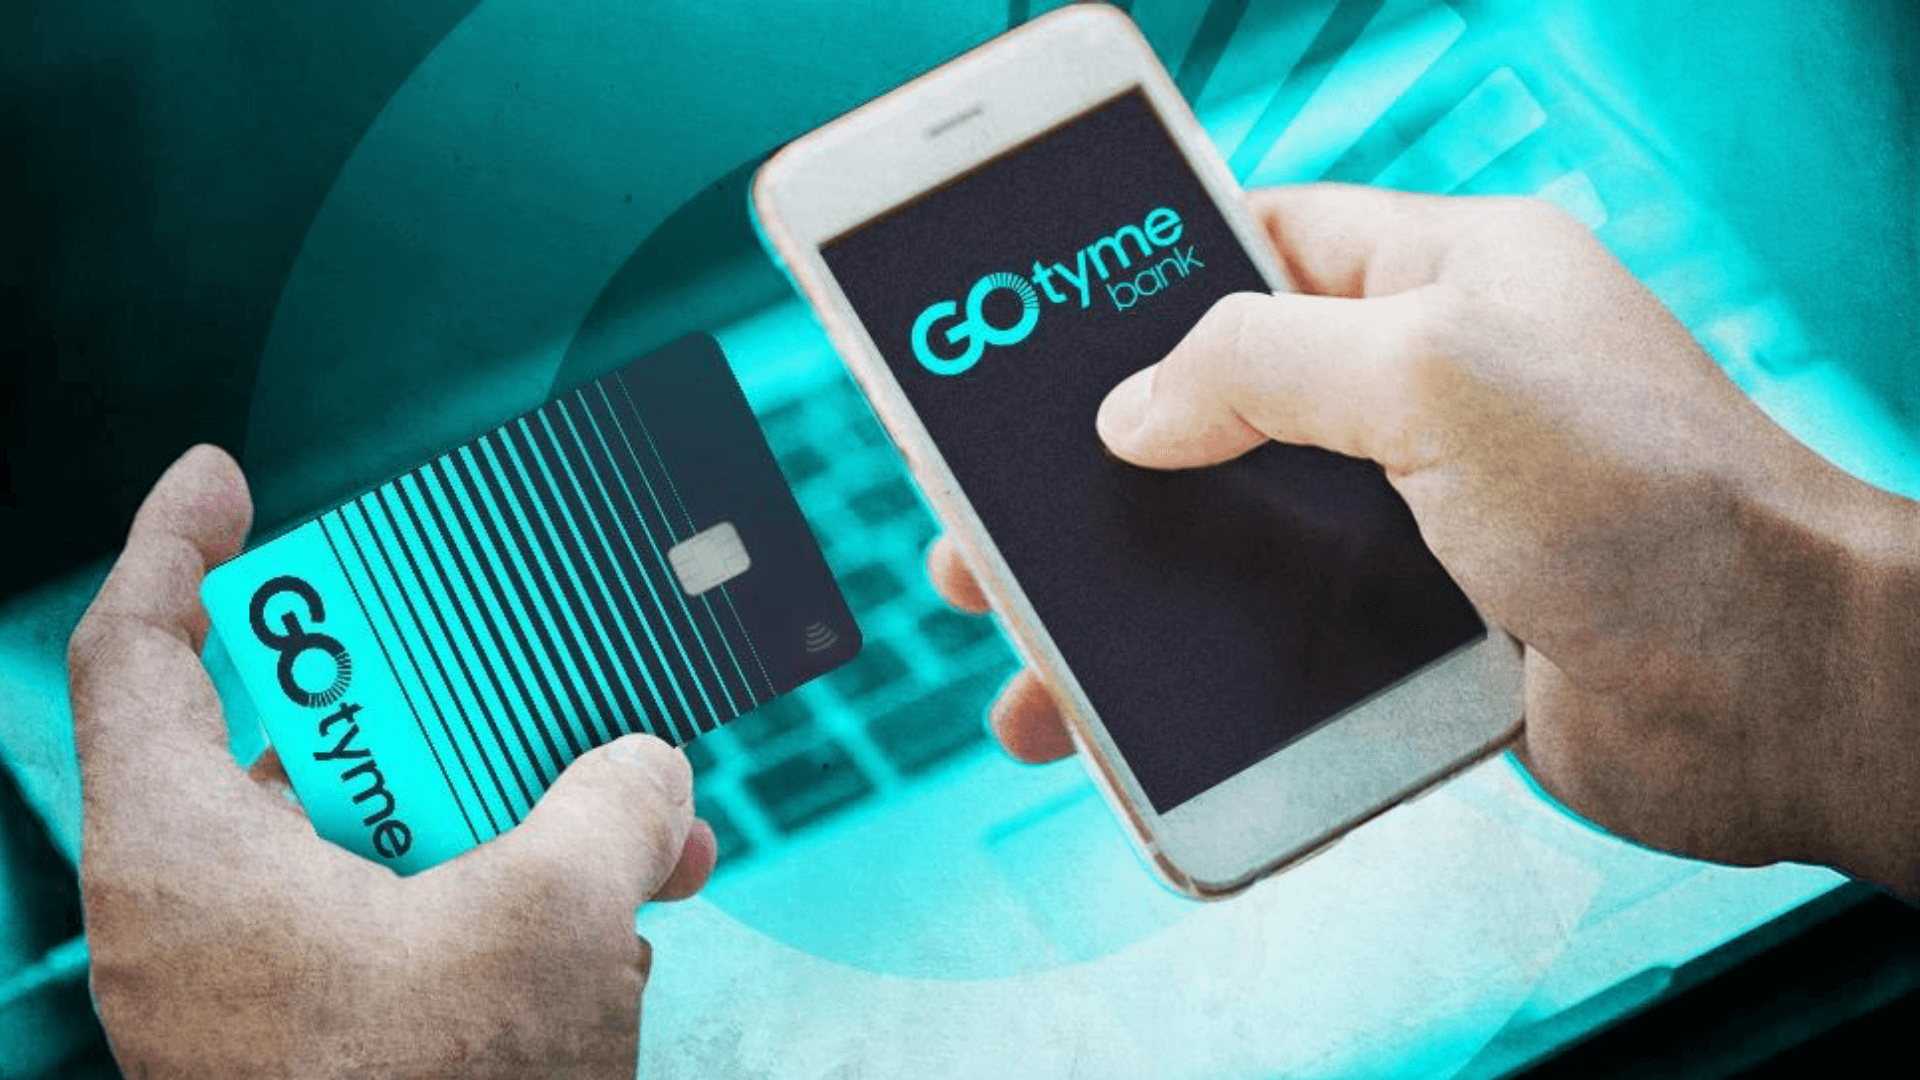 GoTyme Bank Receives BSP Approval to Bring High-Quality Digital Banking Services to PH